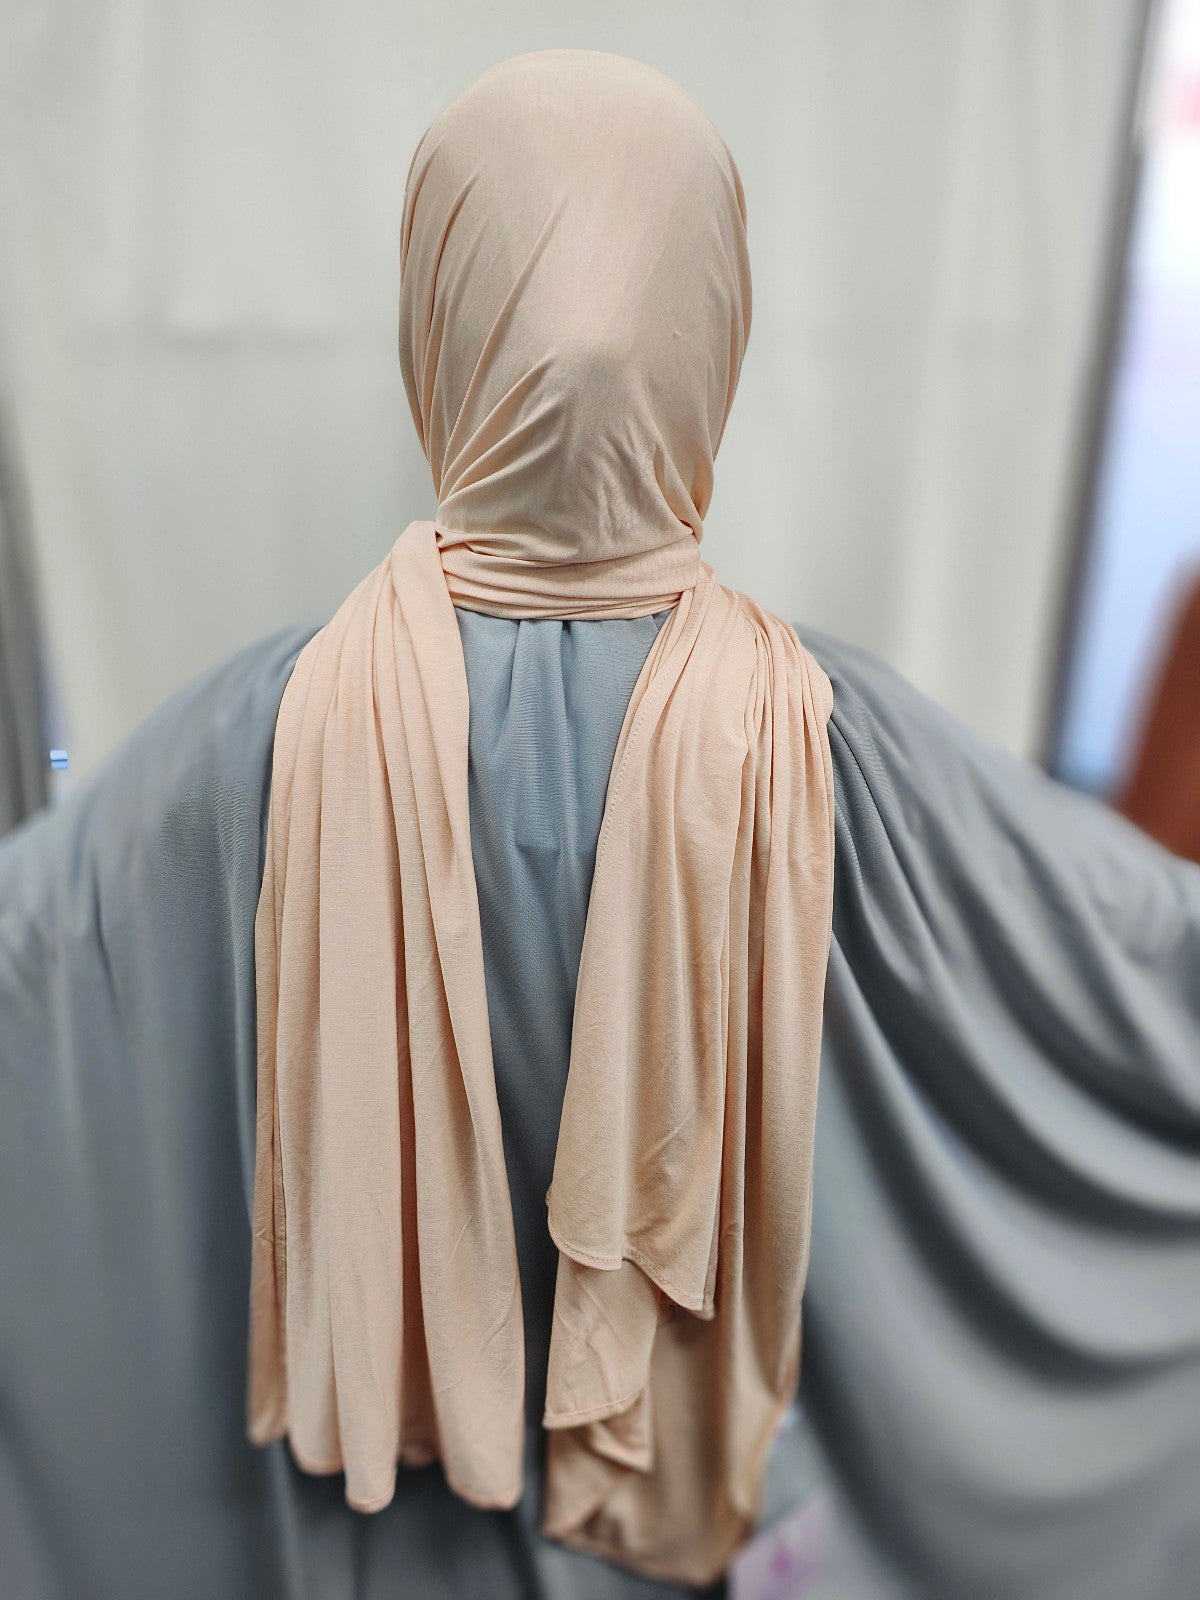 Discover the pinnacle of elegance and comfort with our Nude Pure Bamboo Hijab, exclusively offered by Hikmah Boutique. This hijab seamlessly merges style, breathability, and eco-friendliness, making it the ideal choice for any occasion. Stay cool and confident with Hikmah Boutique's Premium Quality Hijabs.